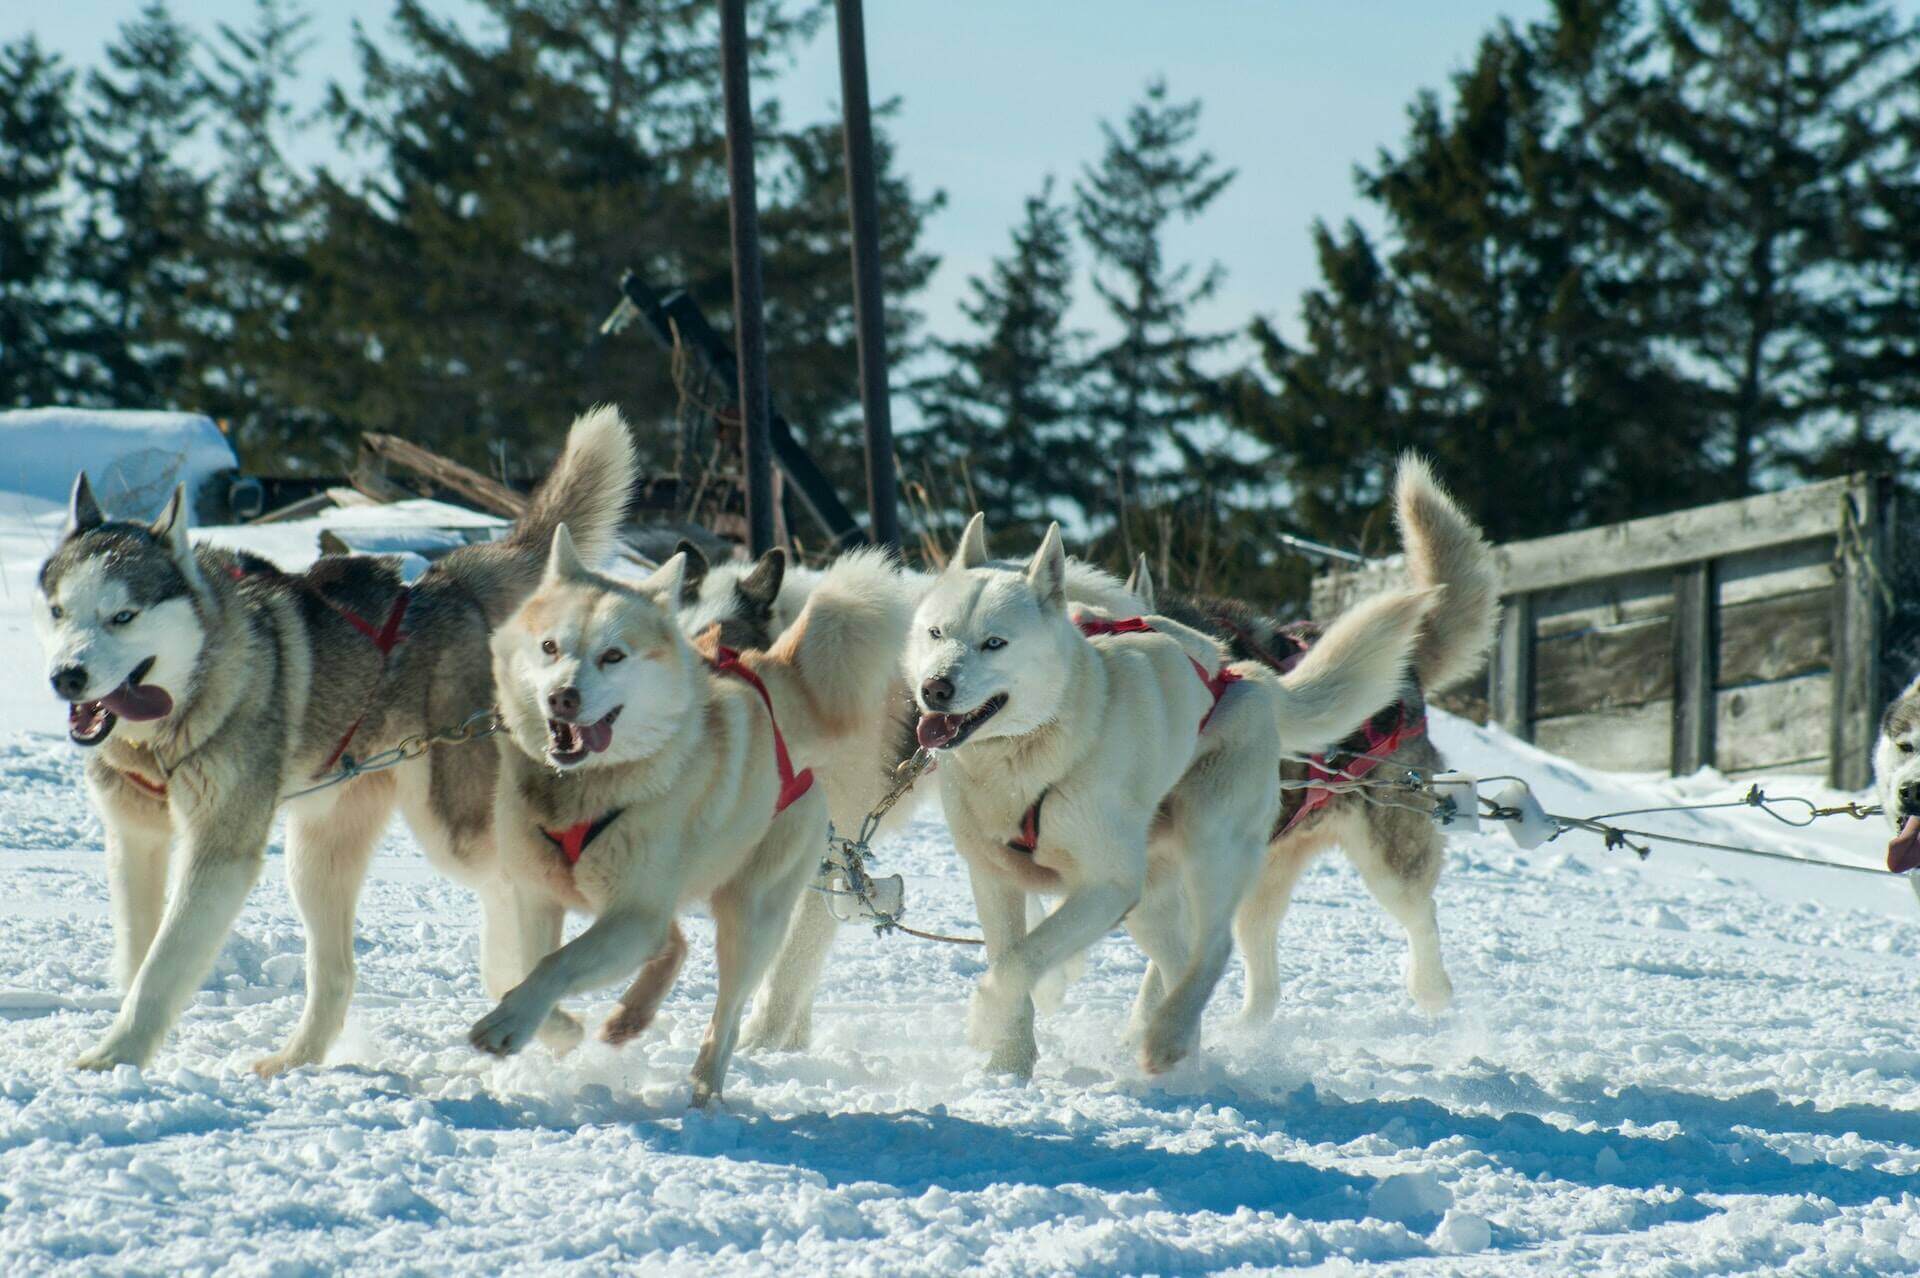 A pack of sled dogs pull a sled through a snowy field